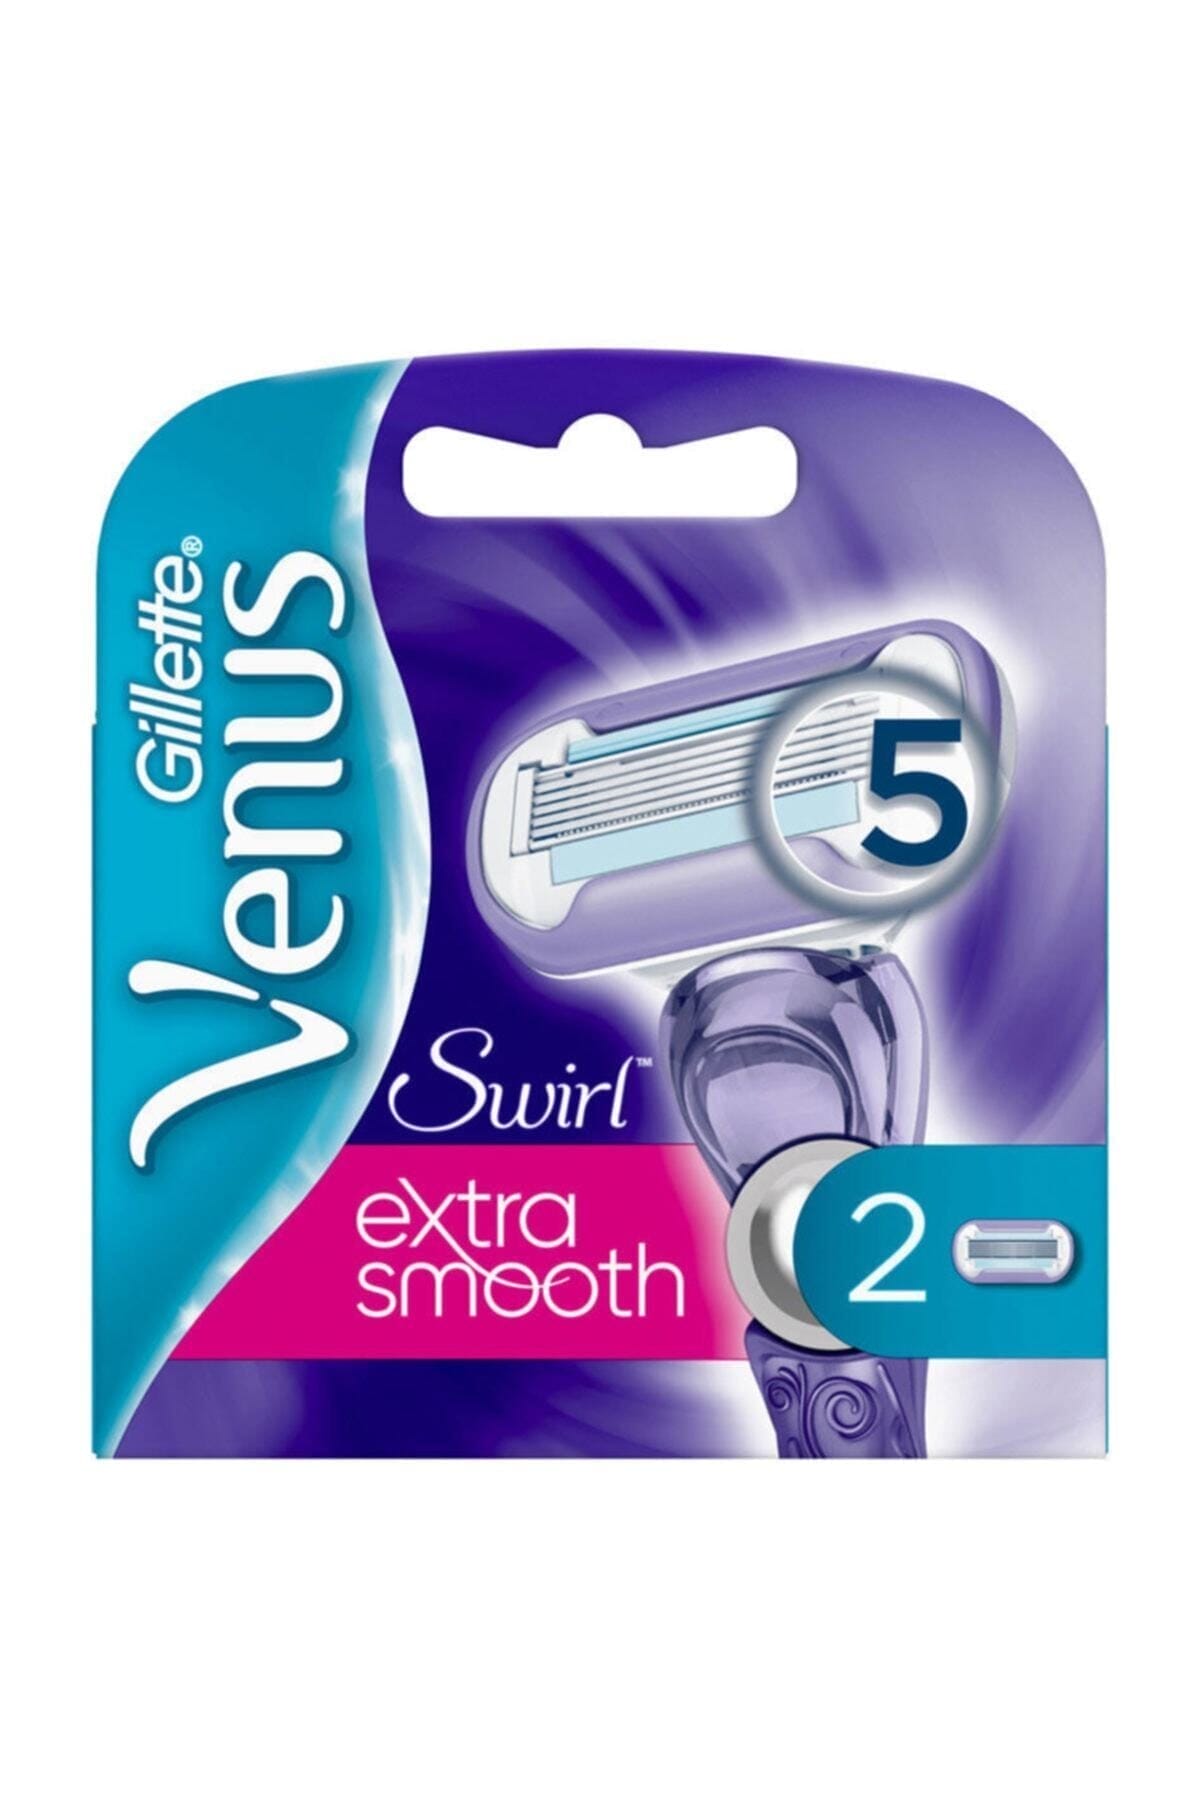 Gillette Venus Swirl Extra Smooth Razor With 1 Refill 1 Adet 